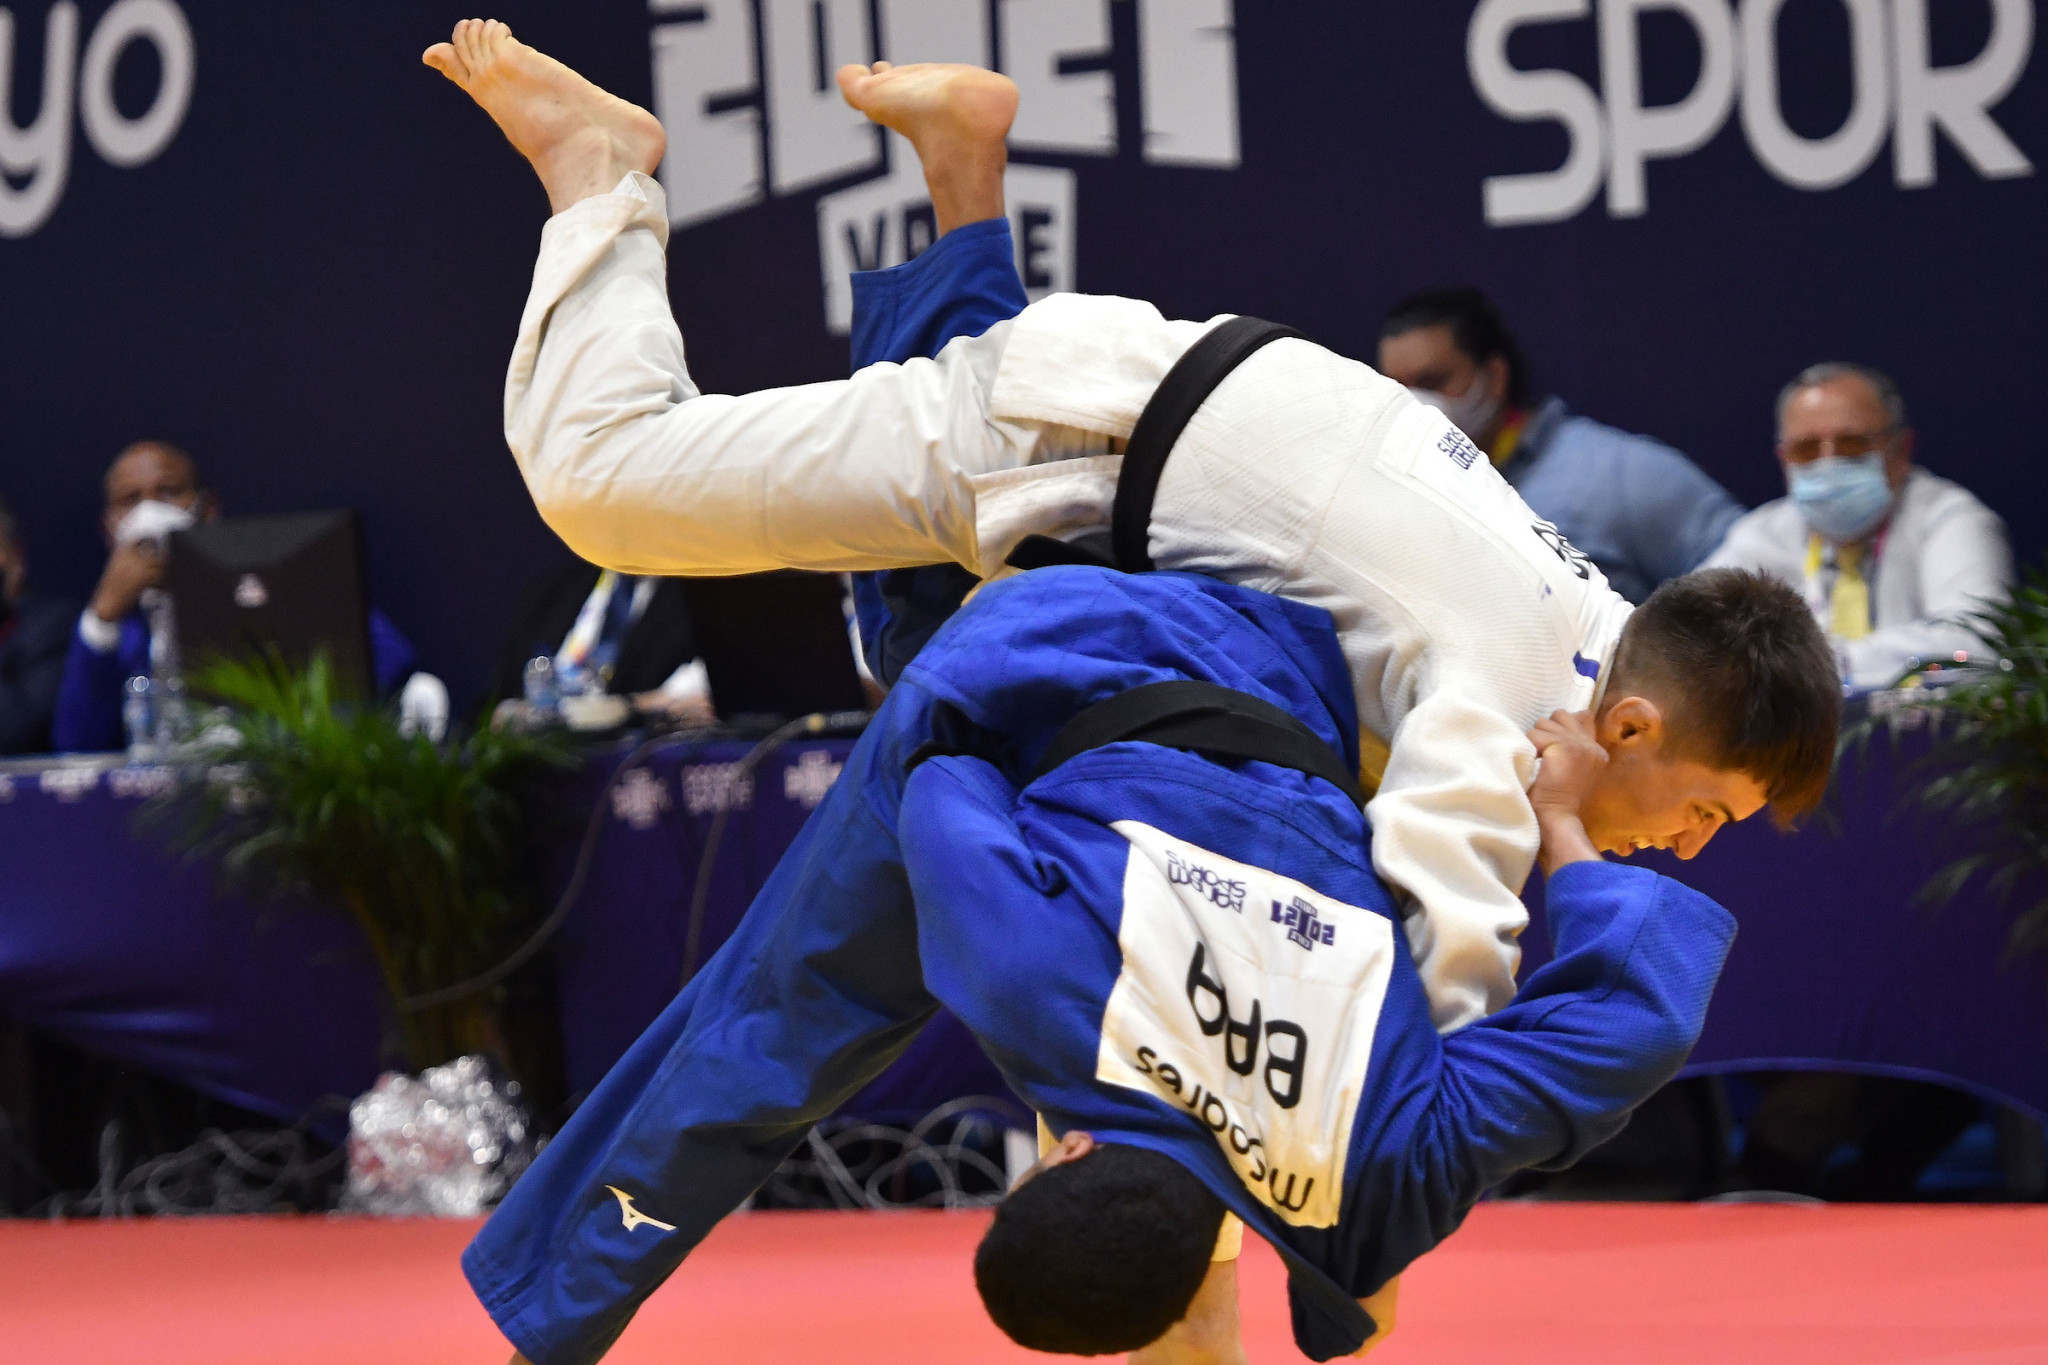 Argentina's Agustin Gil, white, delivered the deciding ippon to beat Brazilian Marcos Soares Dos Santos in the men's under-81kg division ©Agencia.Xpress Media